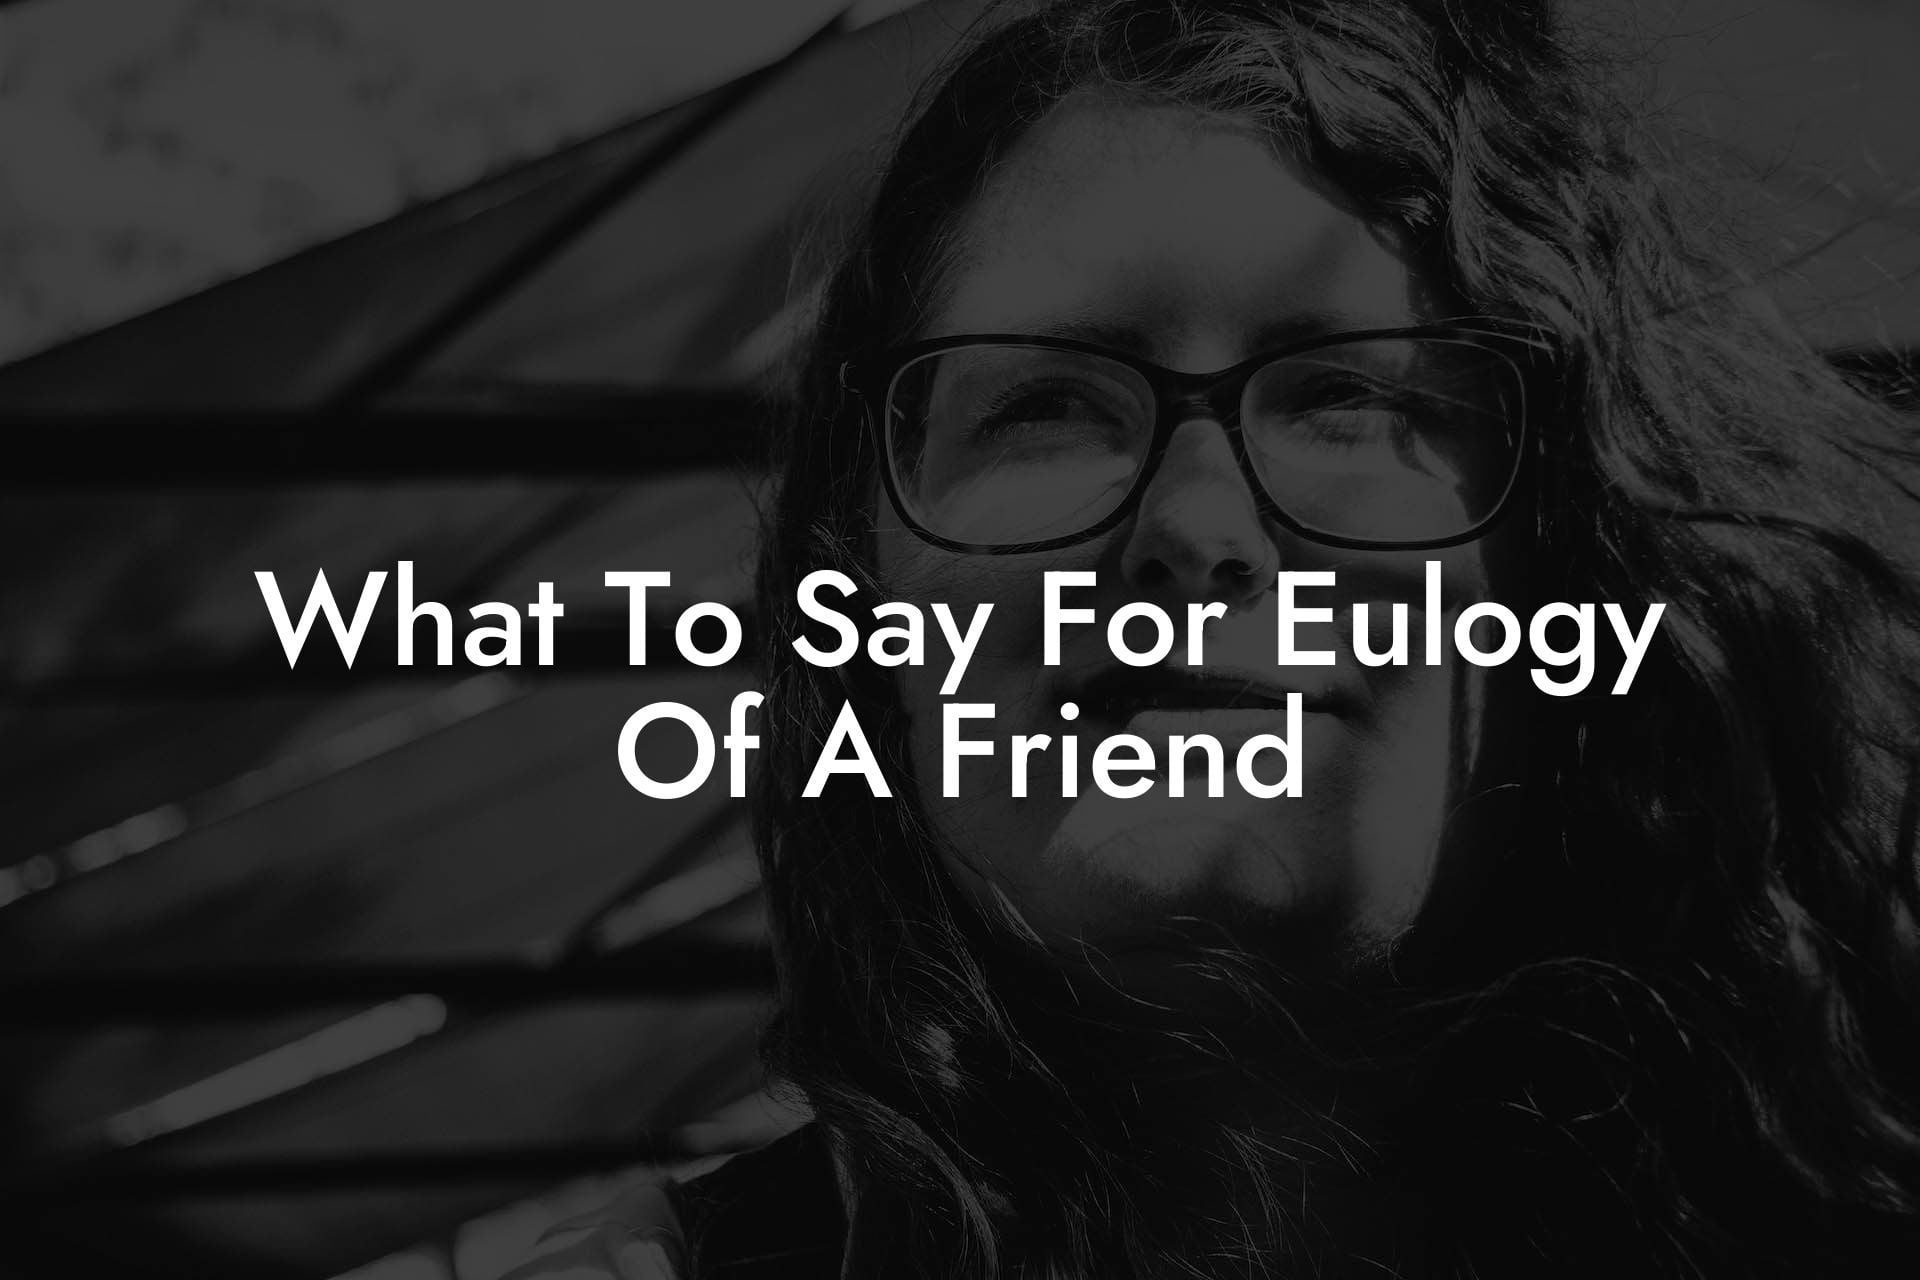 What To Say For Eulogy Of A Friend